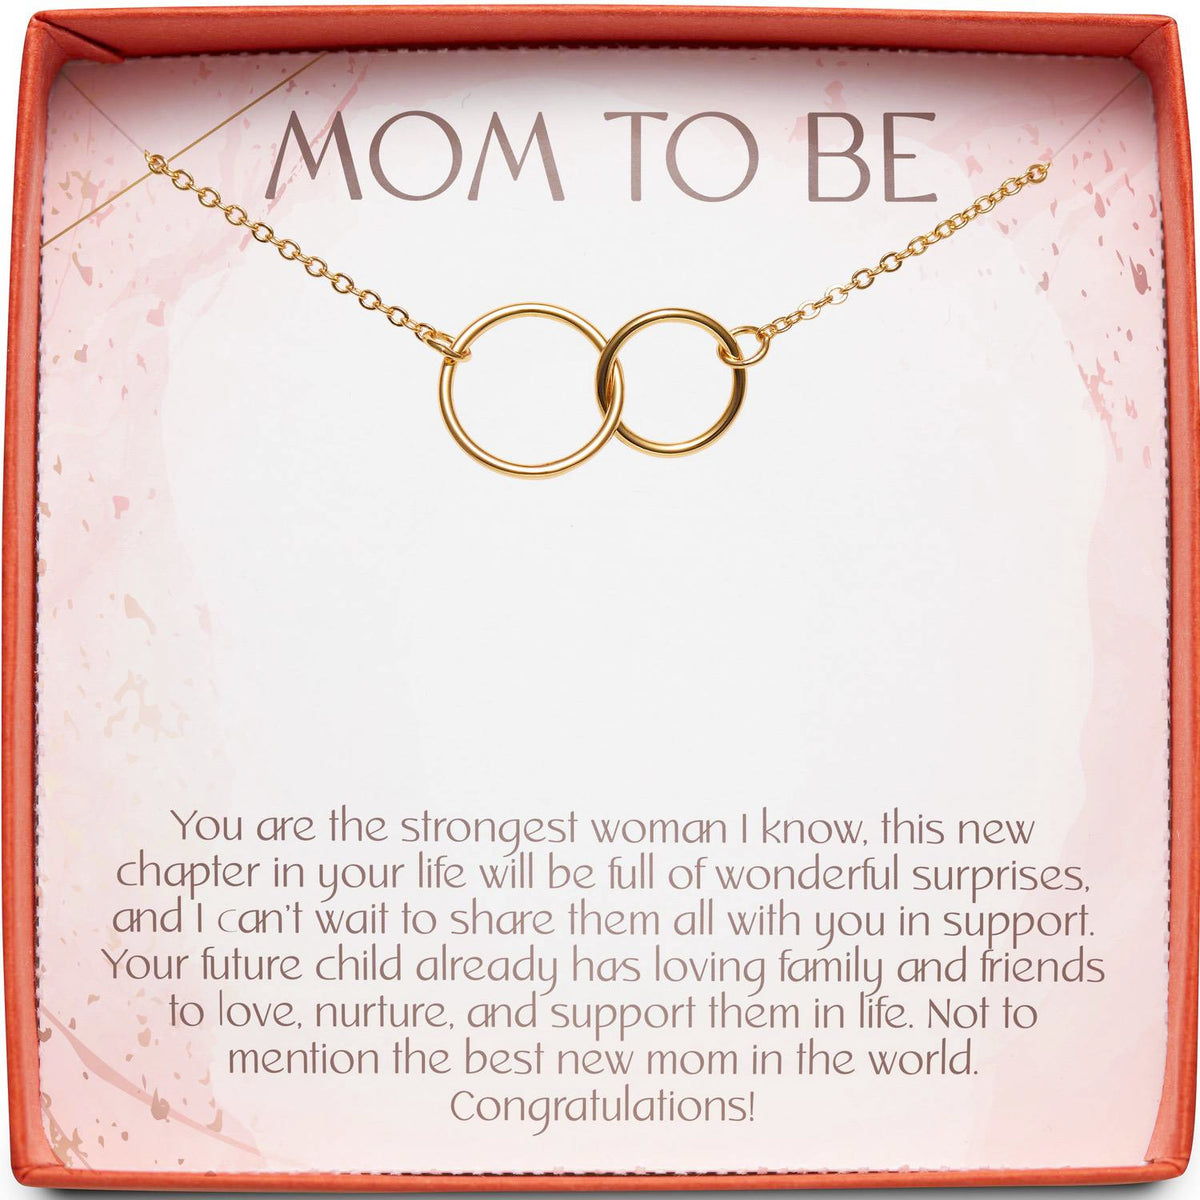 Mom to Be | Strongest Woman I Know | Interlocking Circles